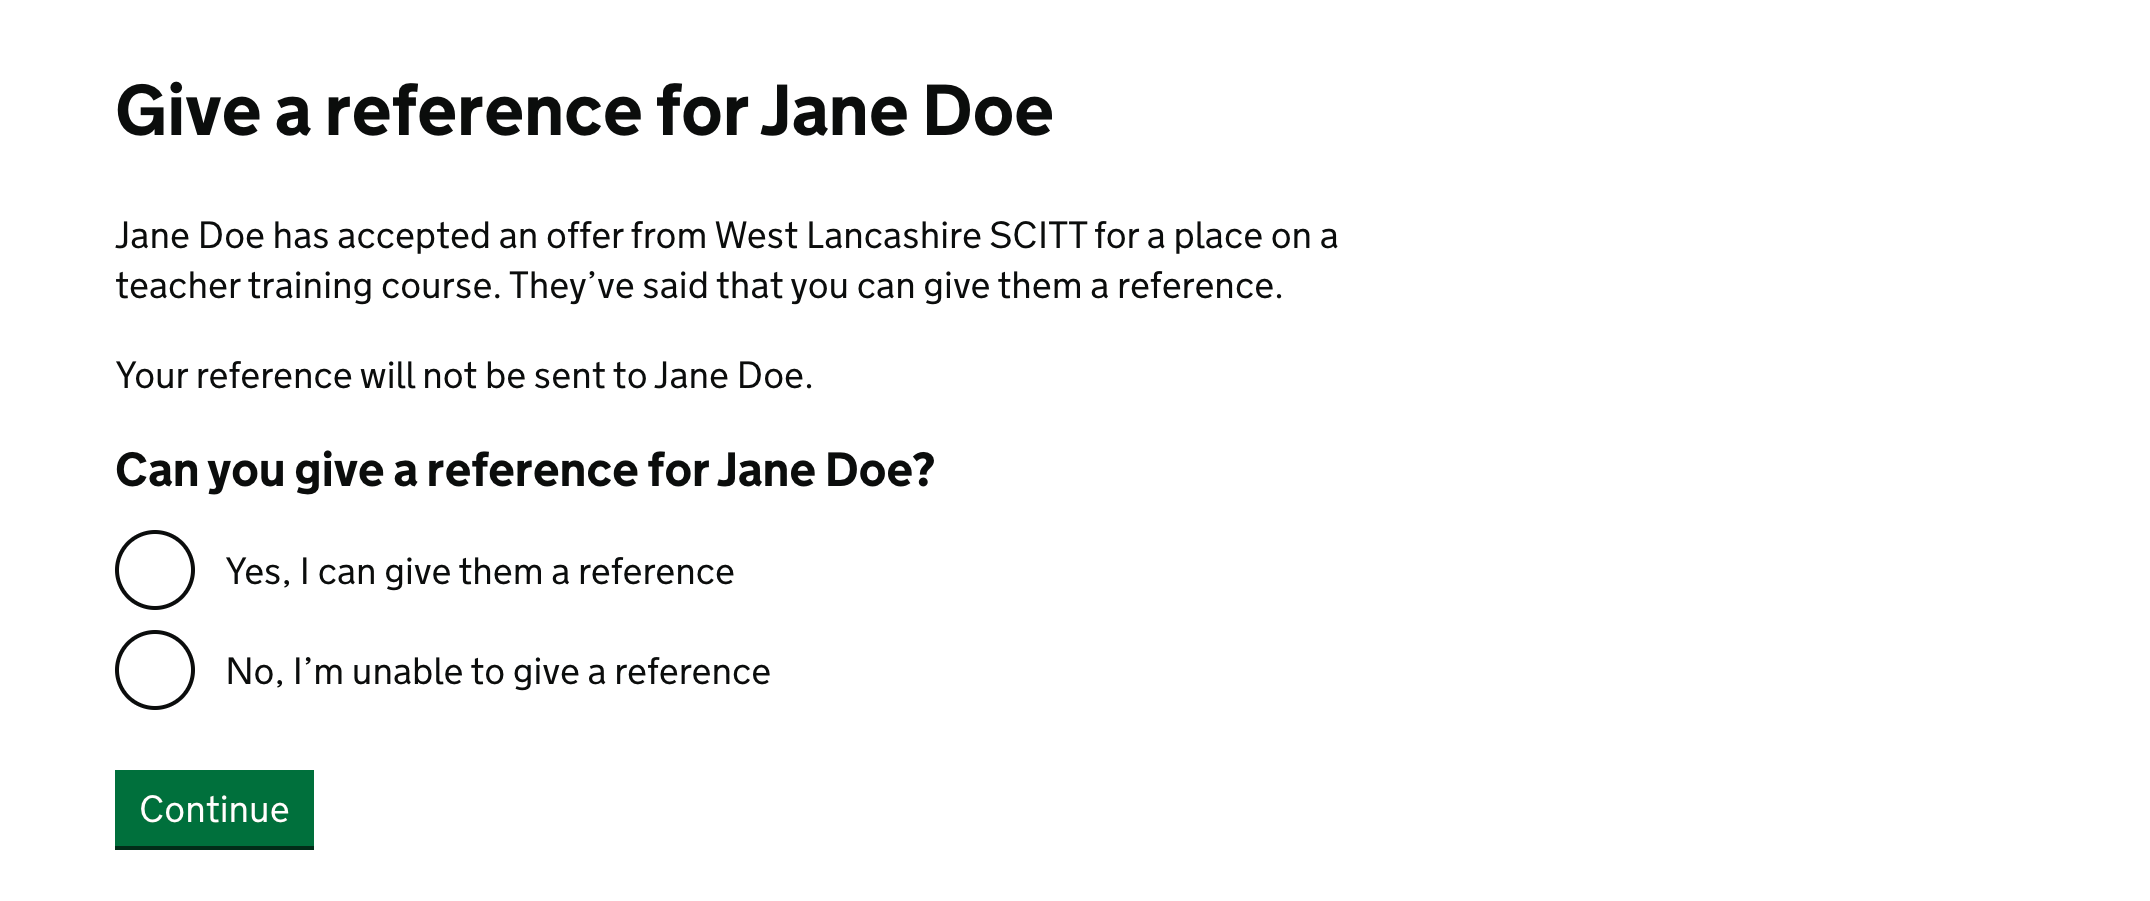 Screenshot showing the heading 'Give a reference for Jane Doe' followed by the question 'Can you give a reference for Jane Doe?' with Yes and No answers.